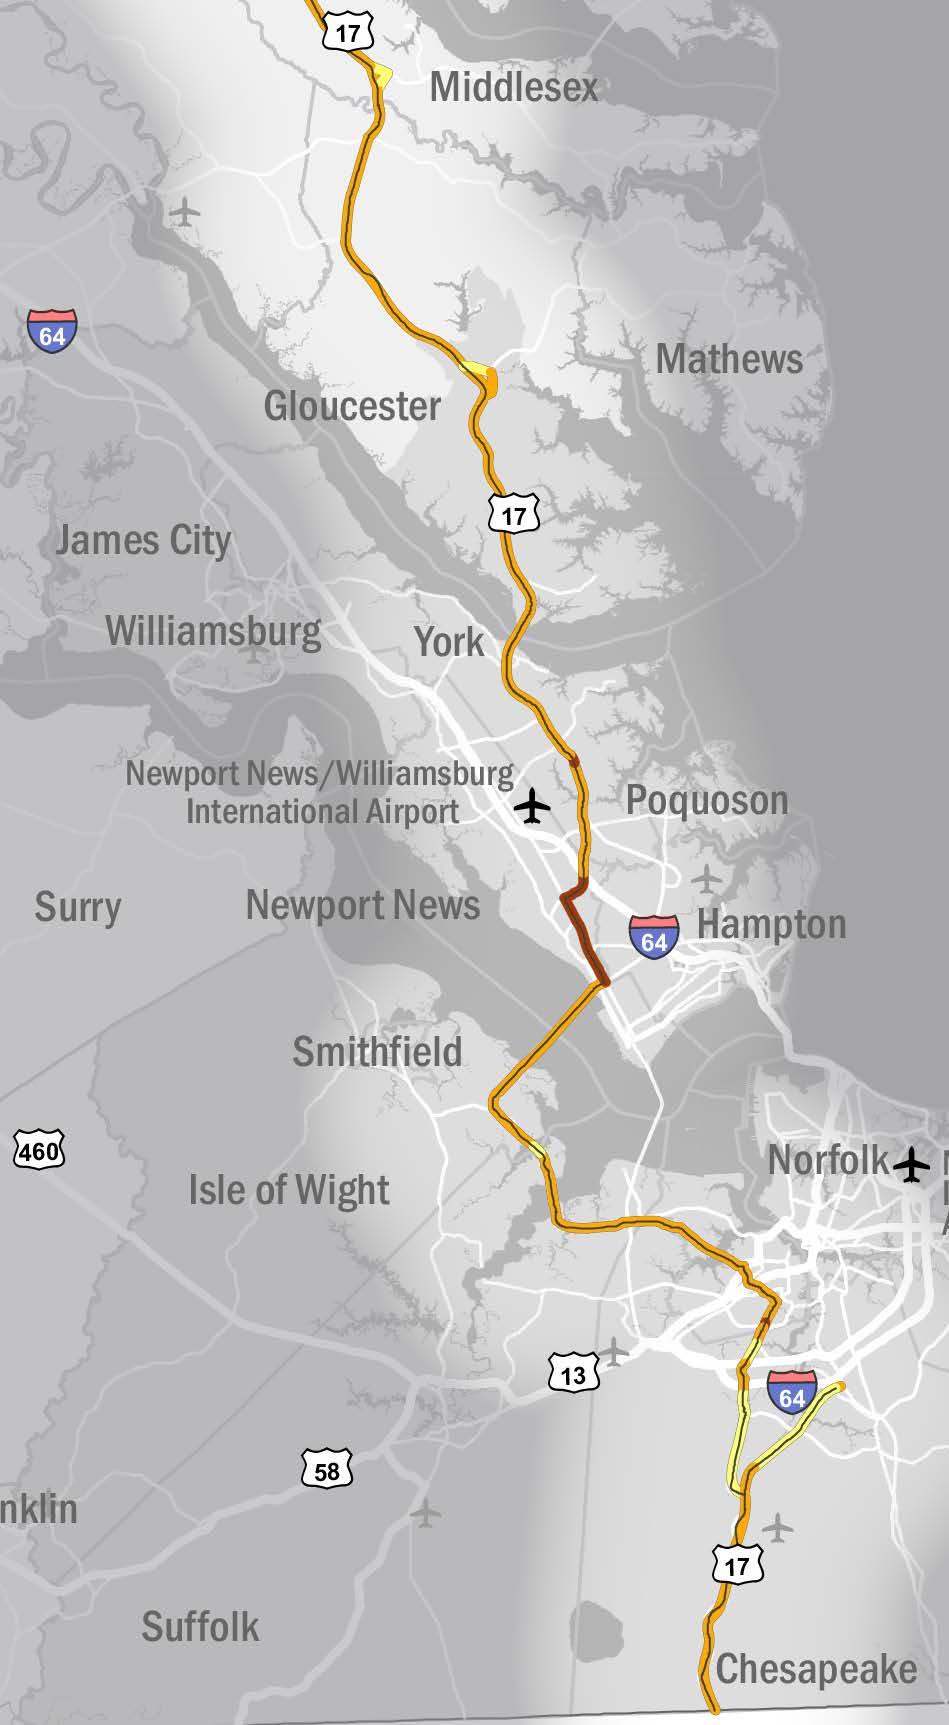 A1 SEGMENT PROFILE Segment A1 begins at the North Carolina border and progresses north to the Middlesex County Line, traversing the area of the Hampton Roads Transportation Planning Organization